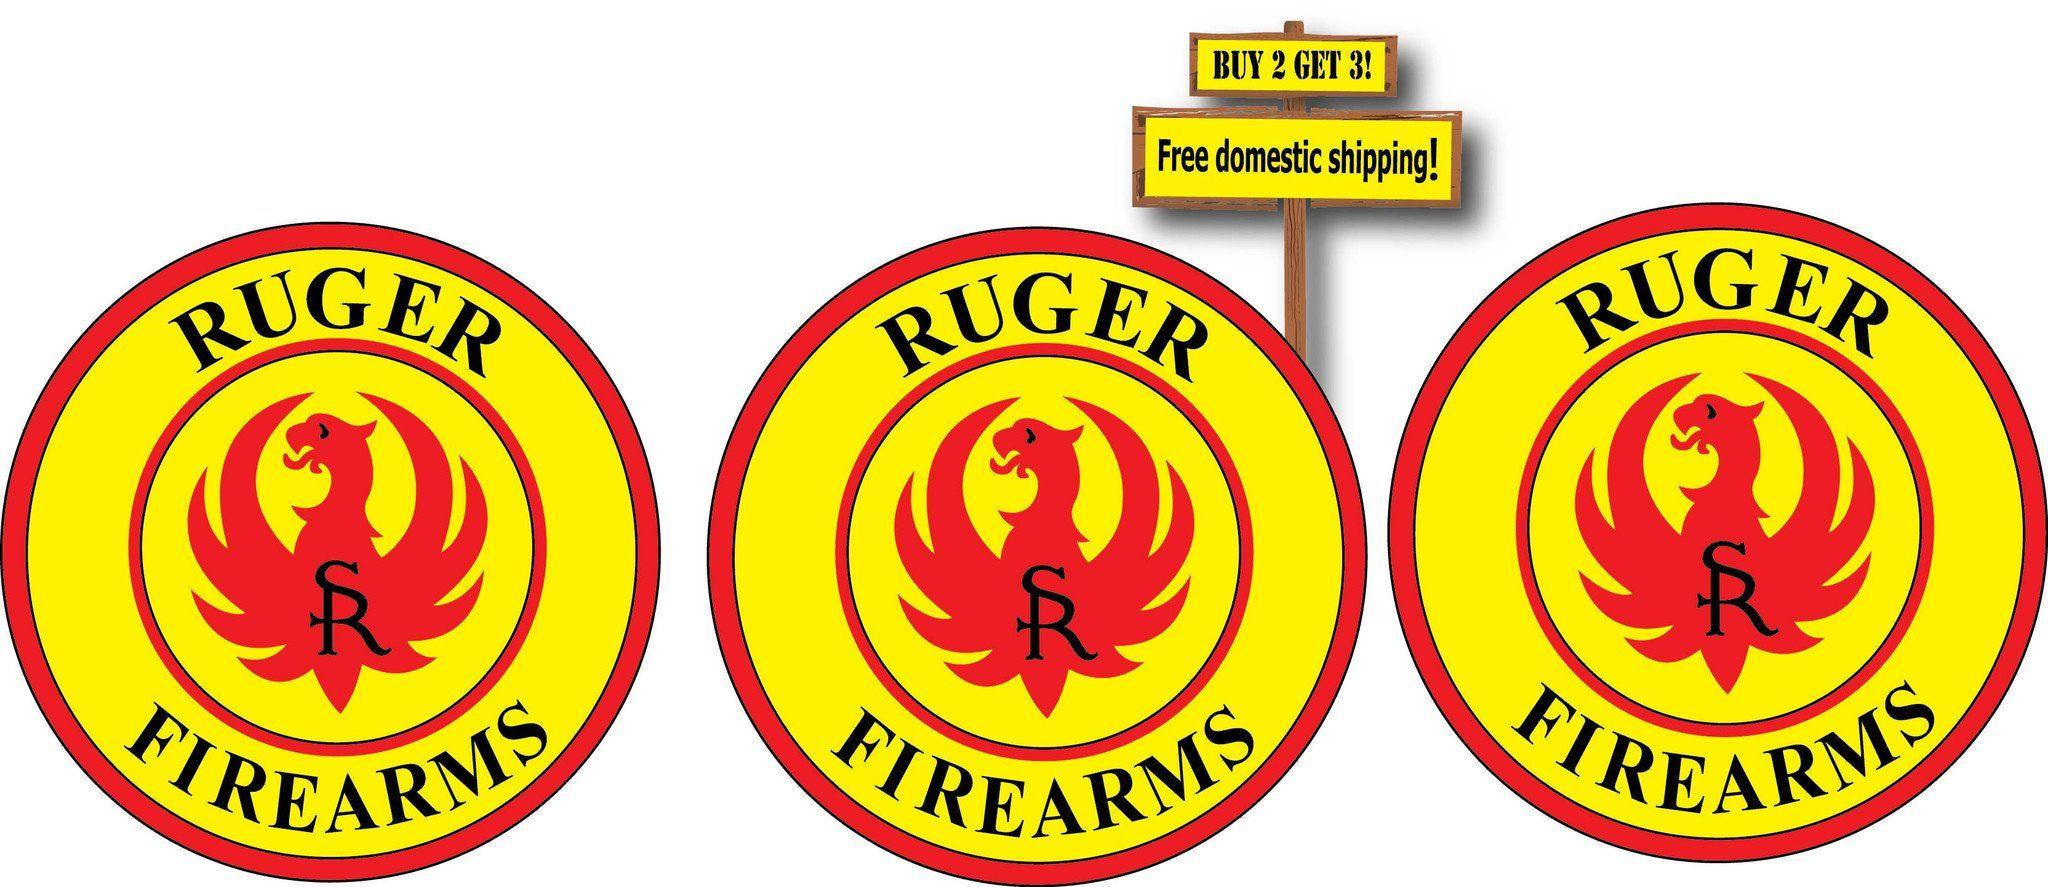 Ruger Firearms Logo - Ruger Firearms Logo Full Color Guns Decal Sticker (1 Pack = 3 Decal ...